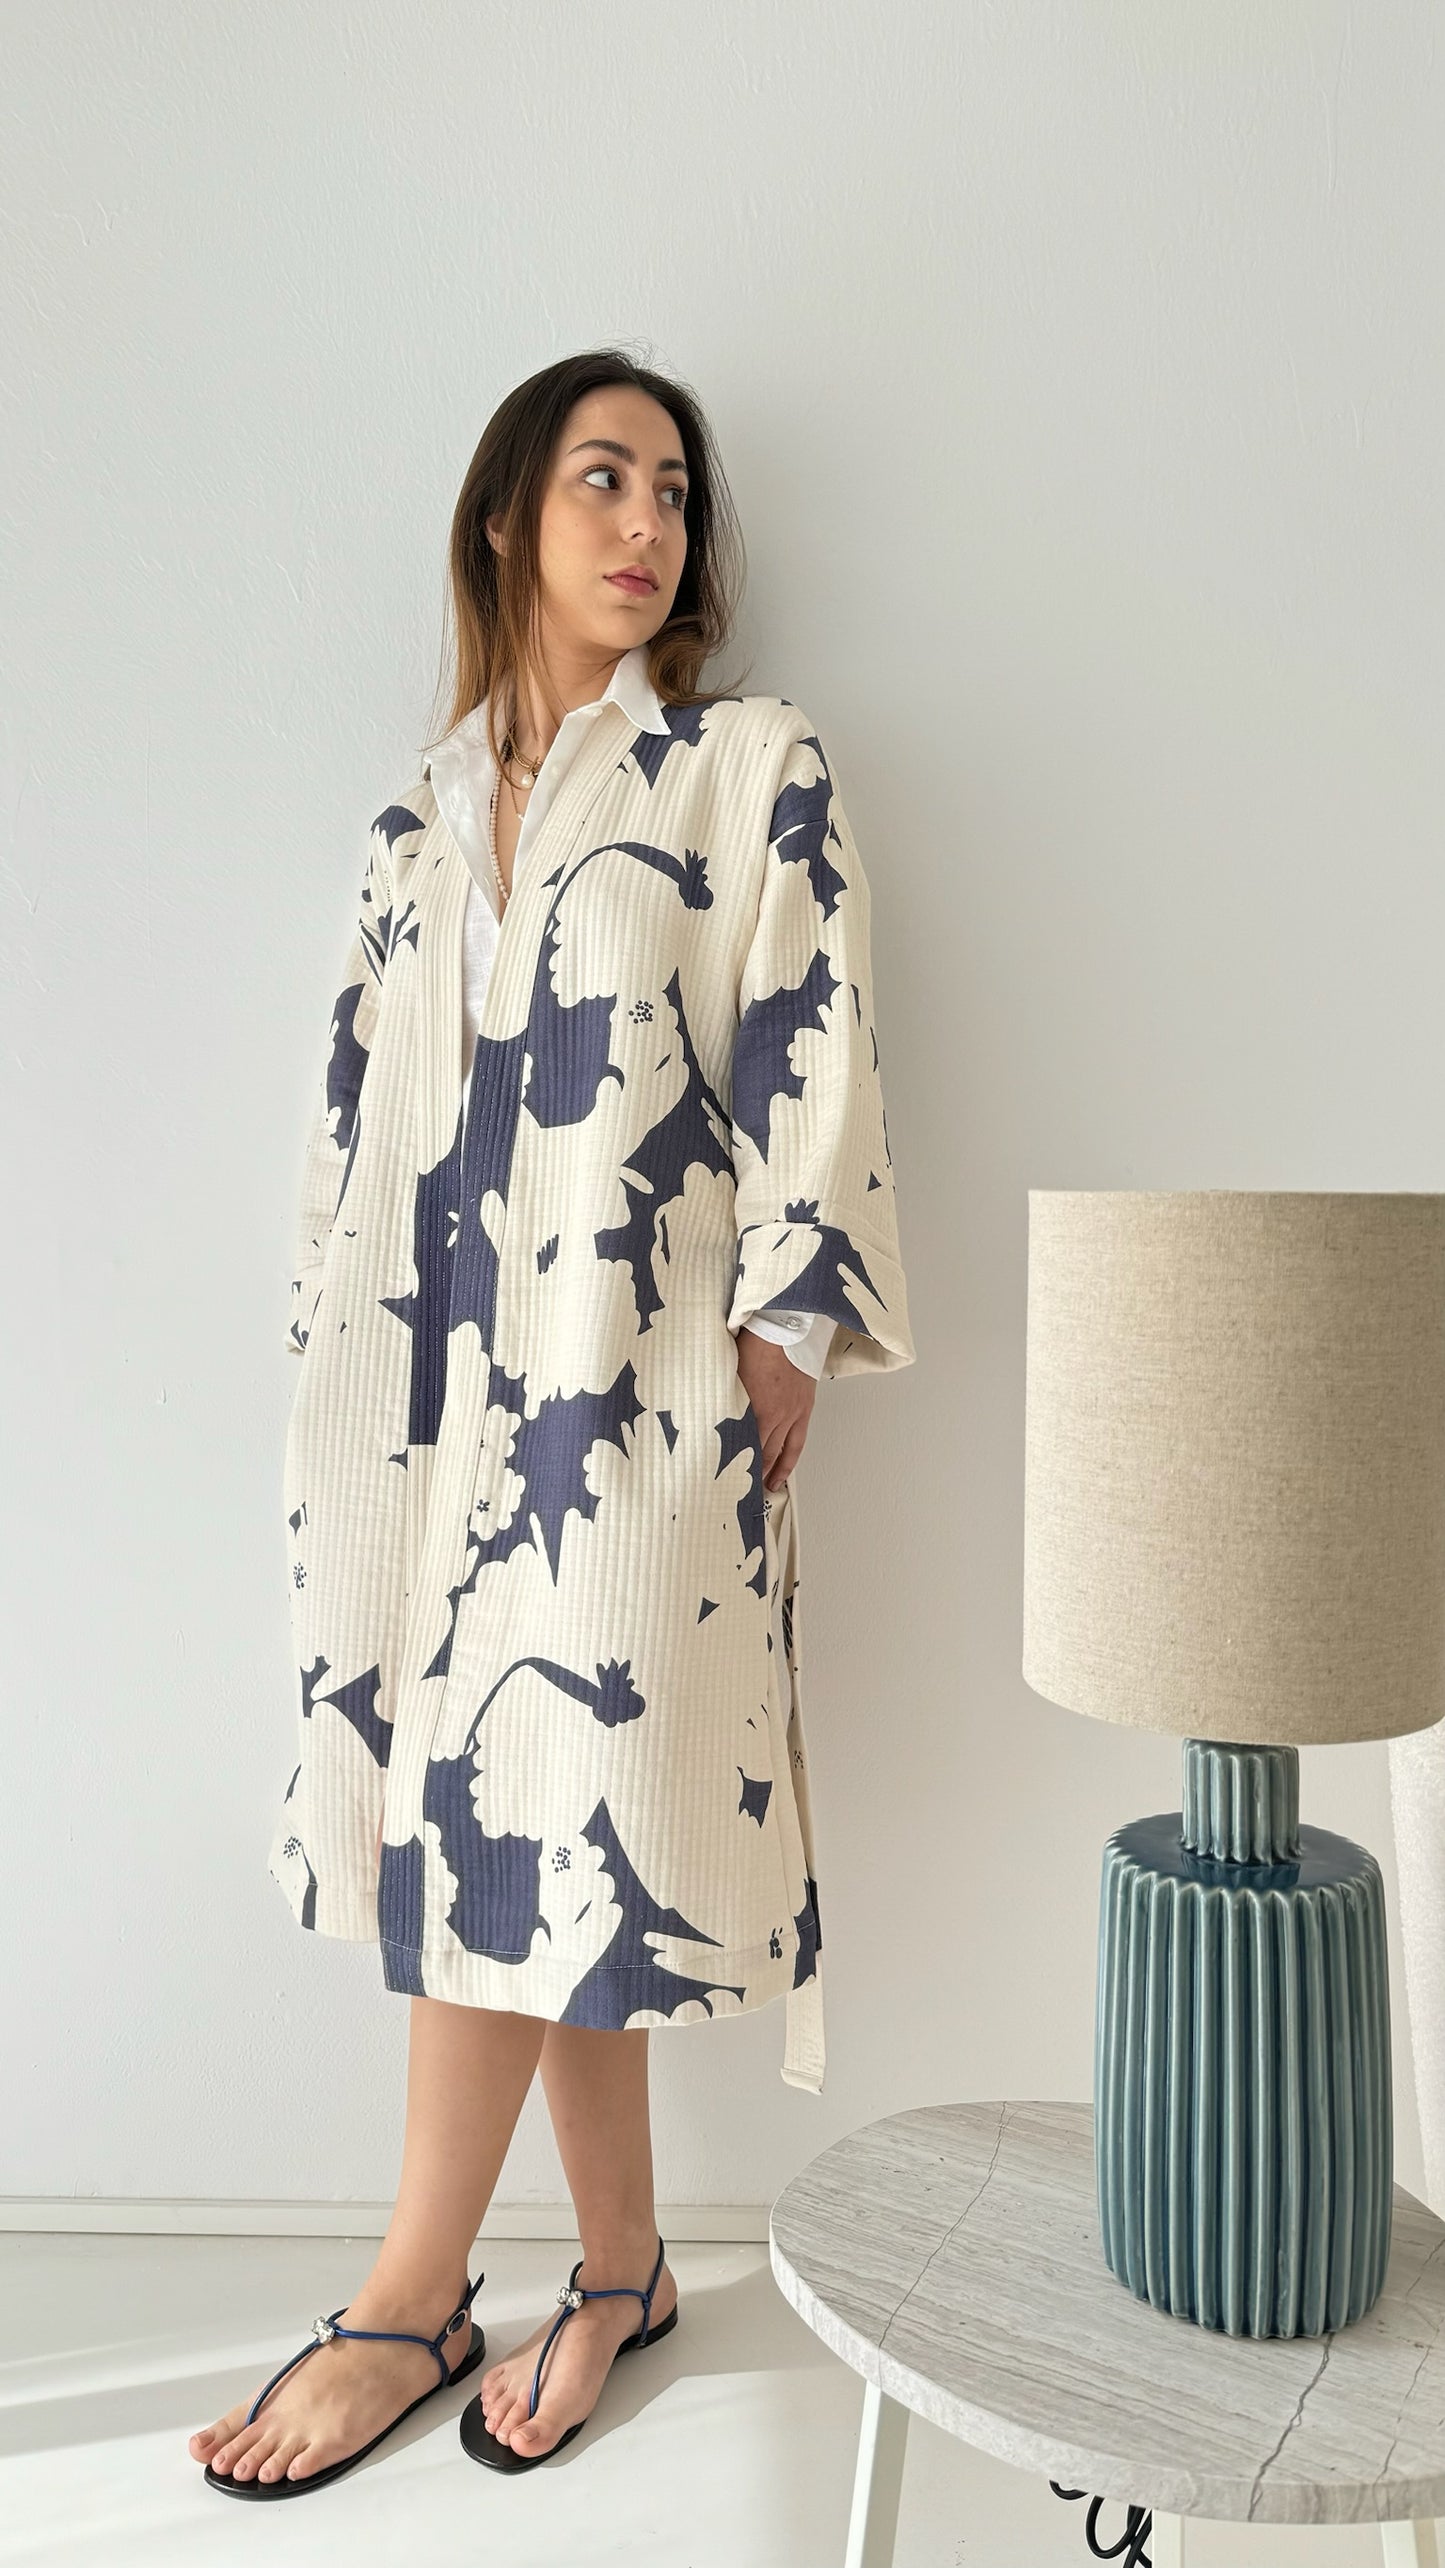 Denim and off white kimono - 100% cotton with contemporary pattern in denim and off white tones, as a bathrobe, home robe or jacket